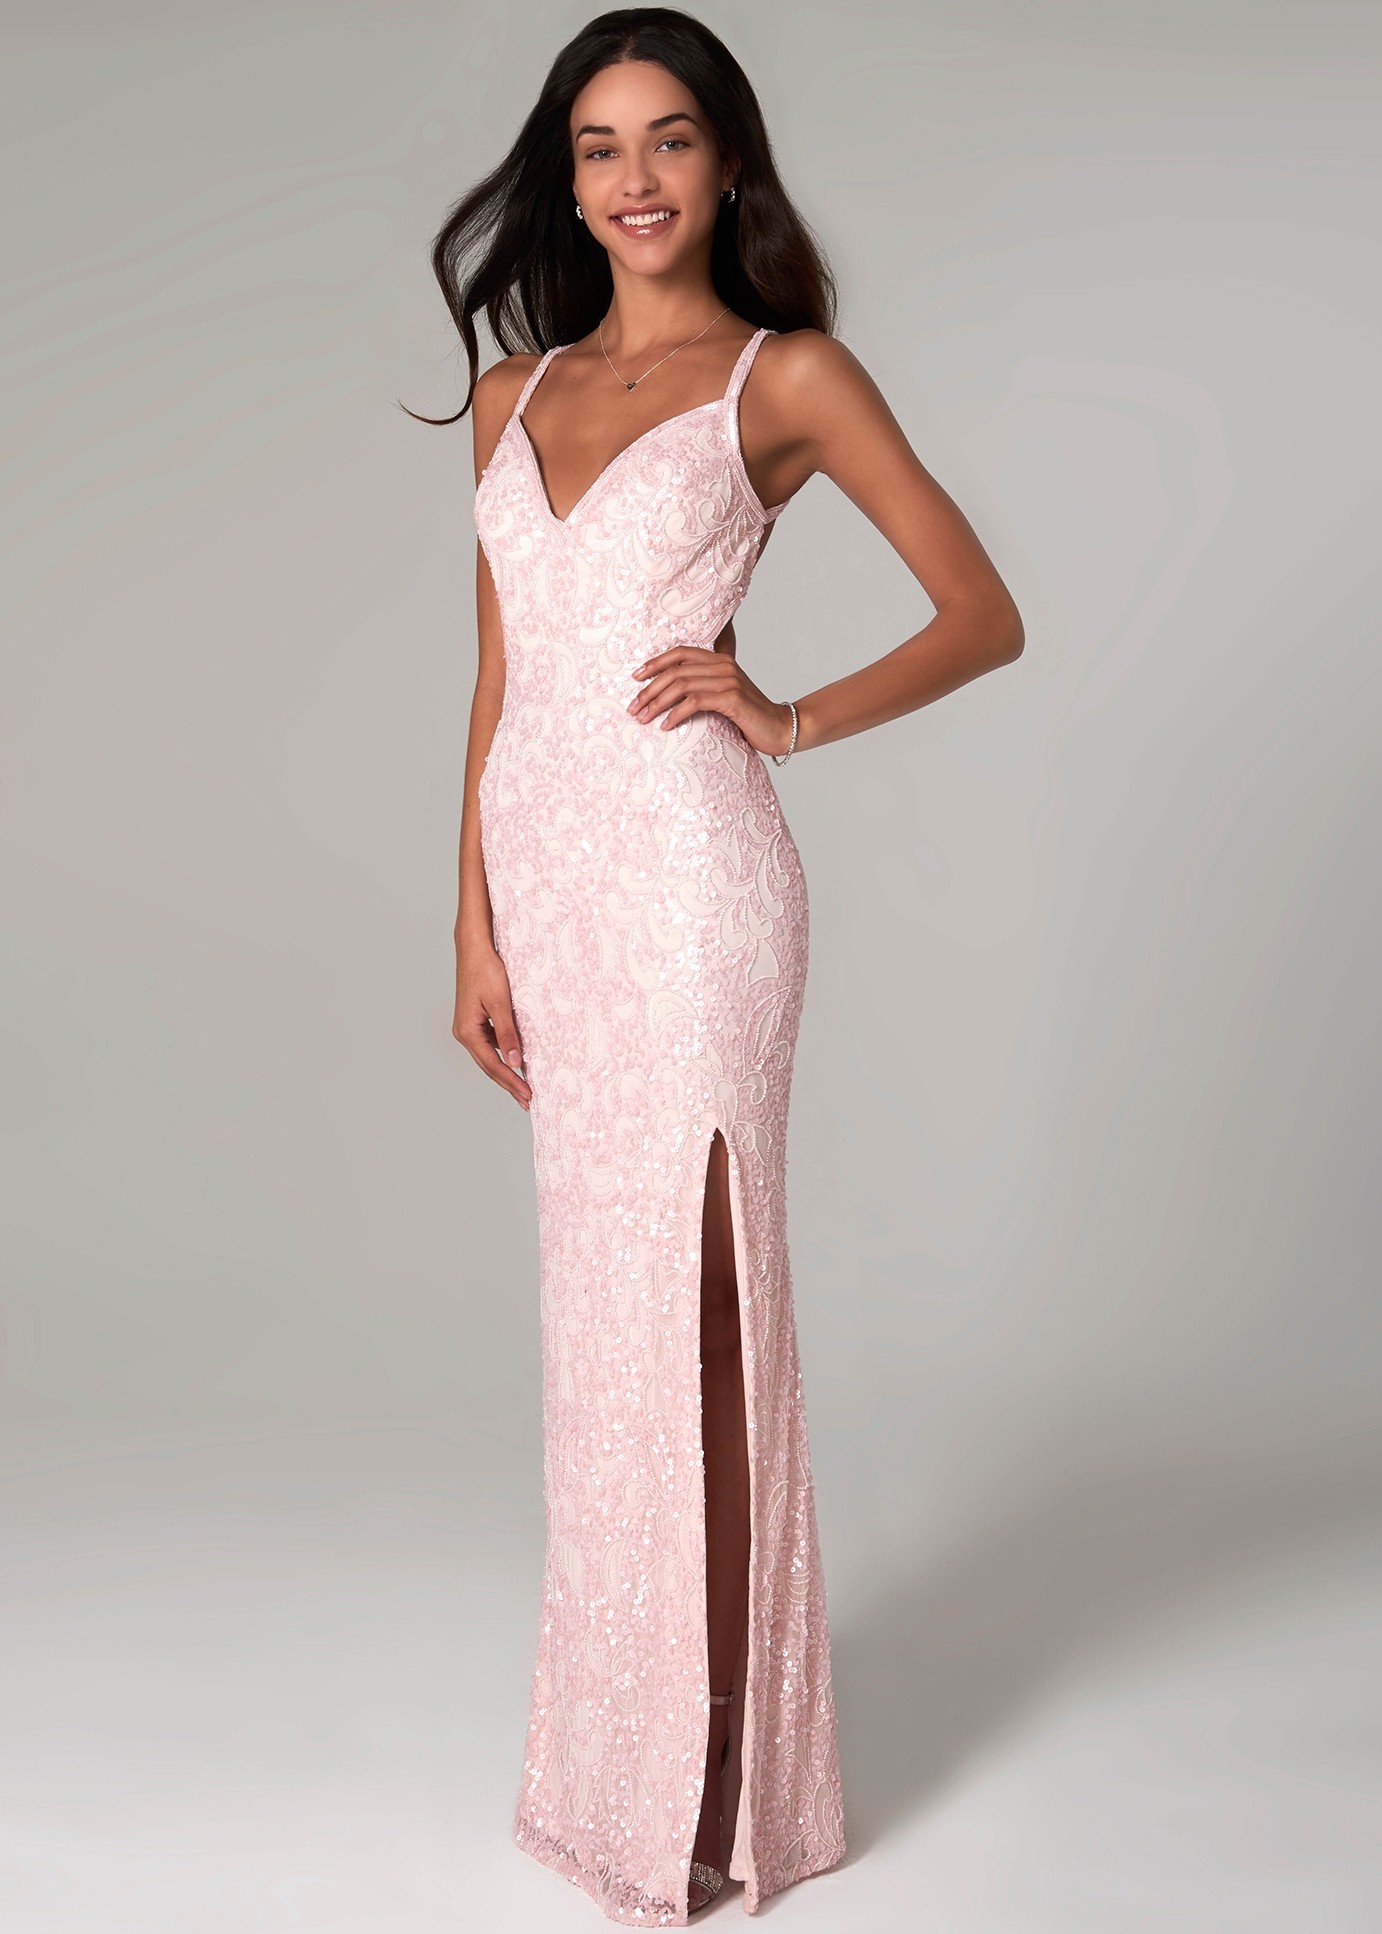 Scala 48932 Strappy Back Sequin Gown | RissyRoos.com